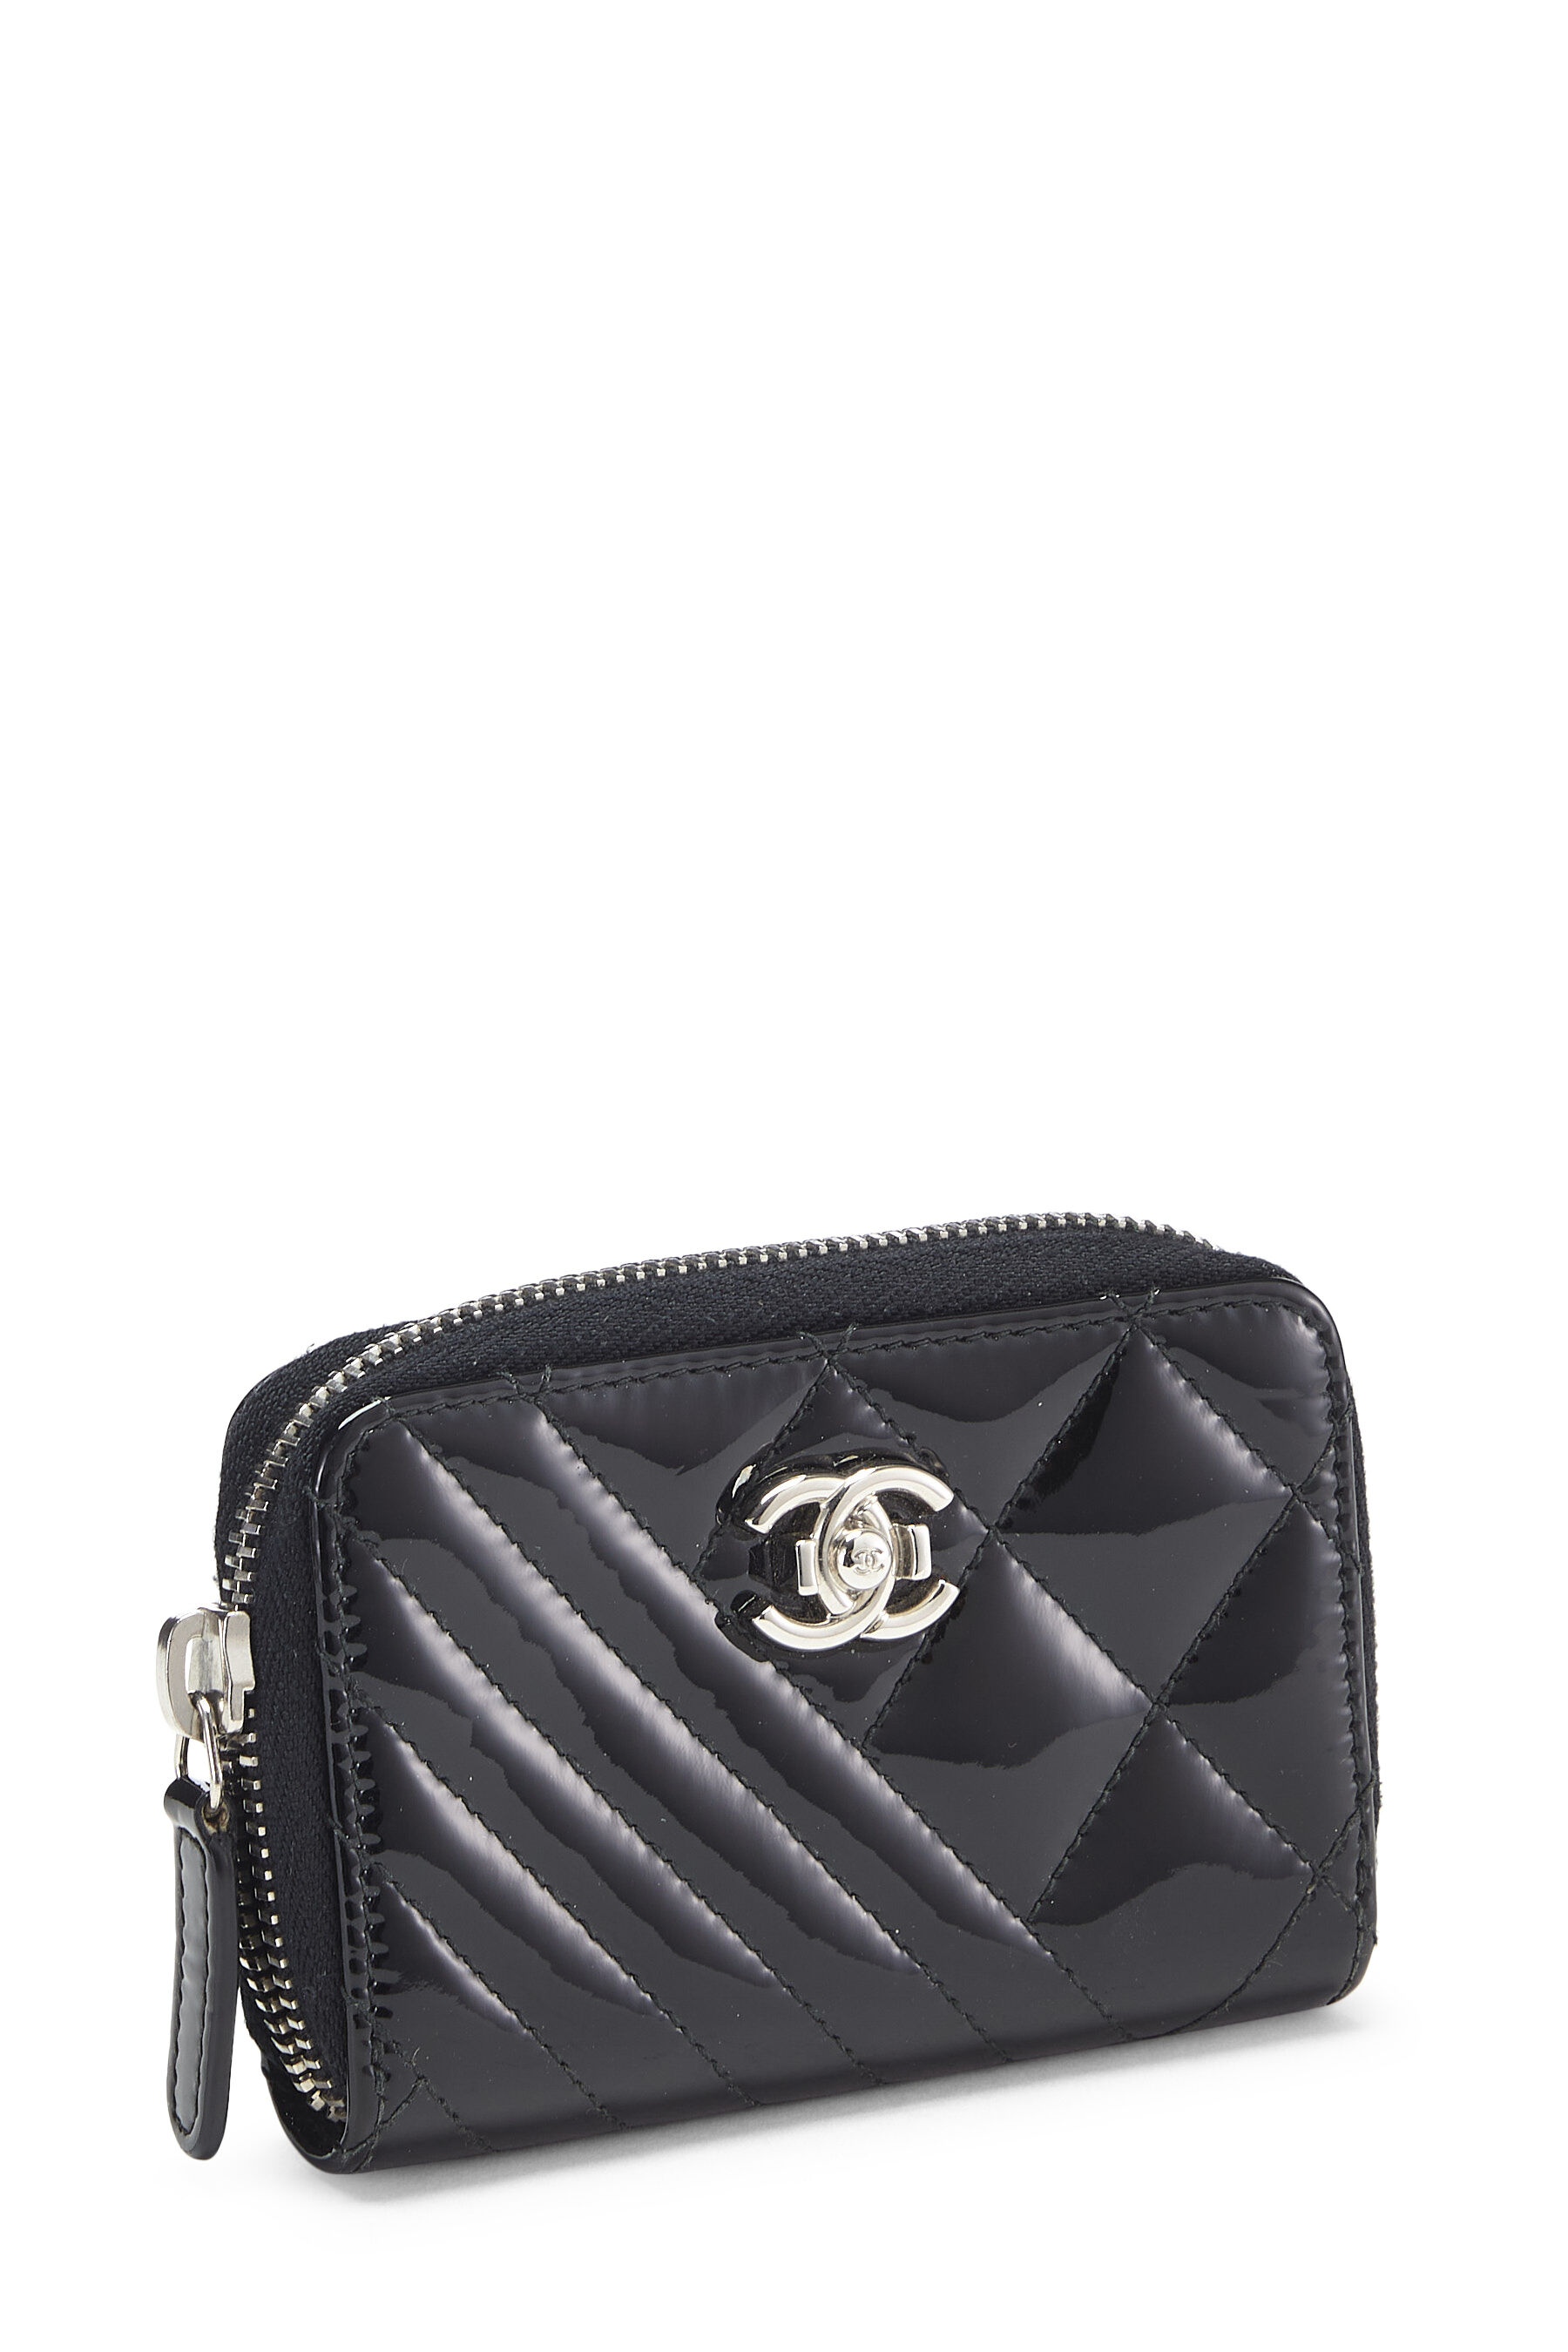 Chanel Black Patent Leather Coin Purse Q6A04O27KB001